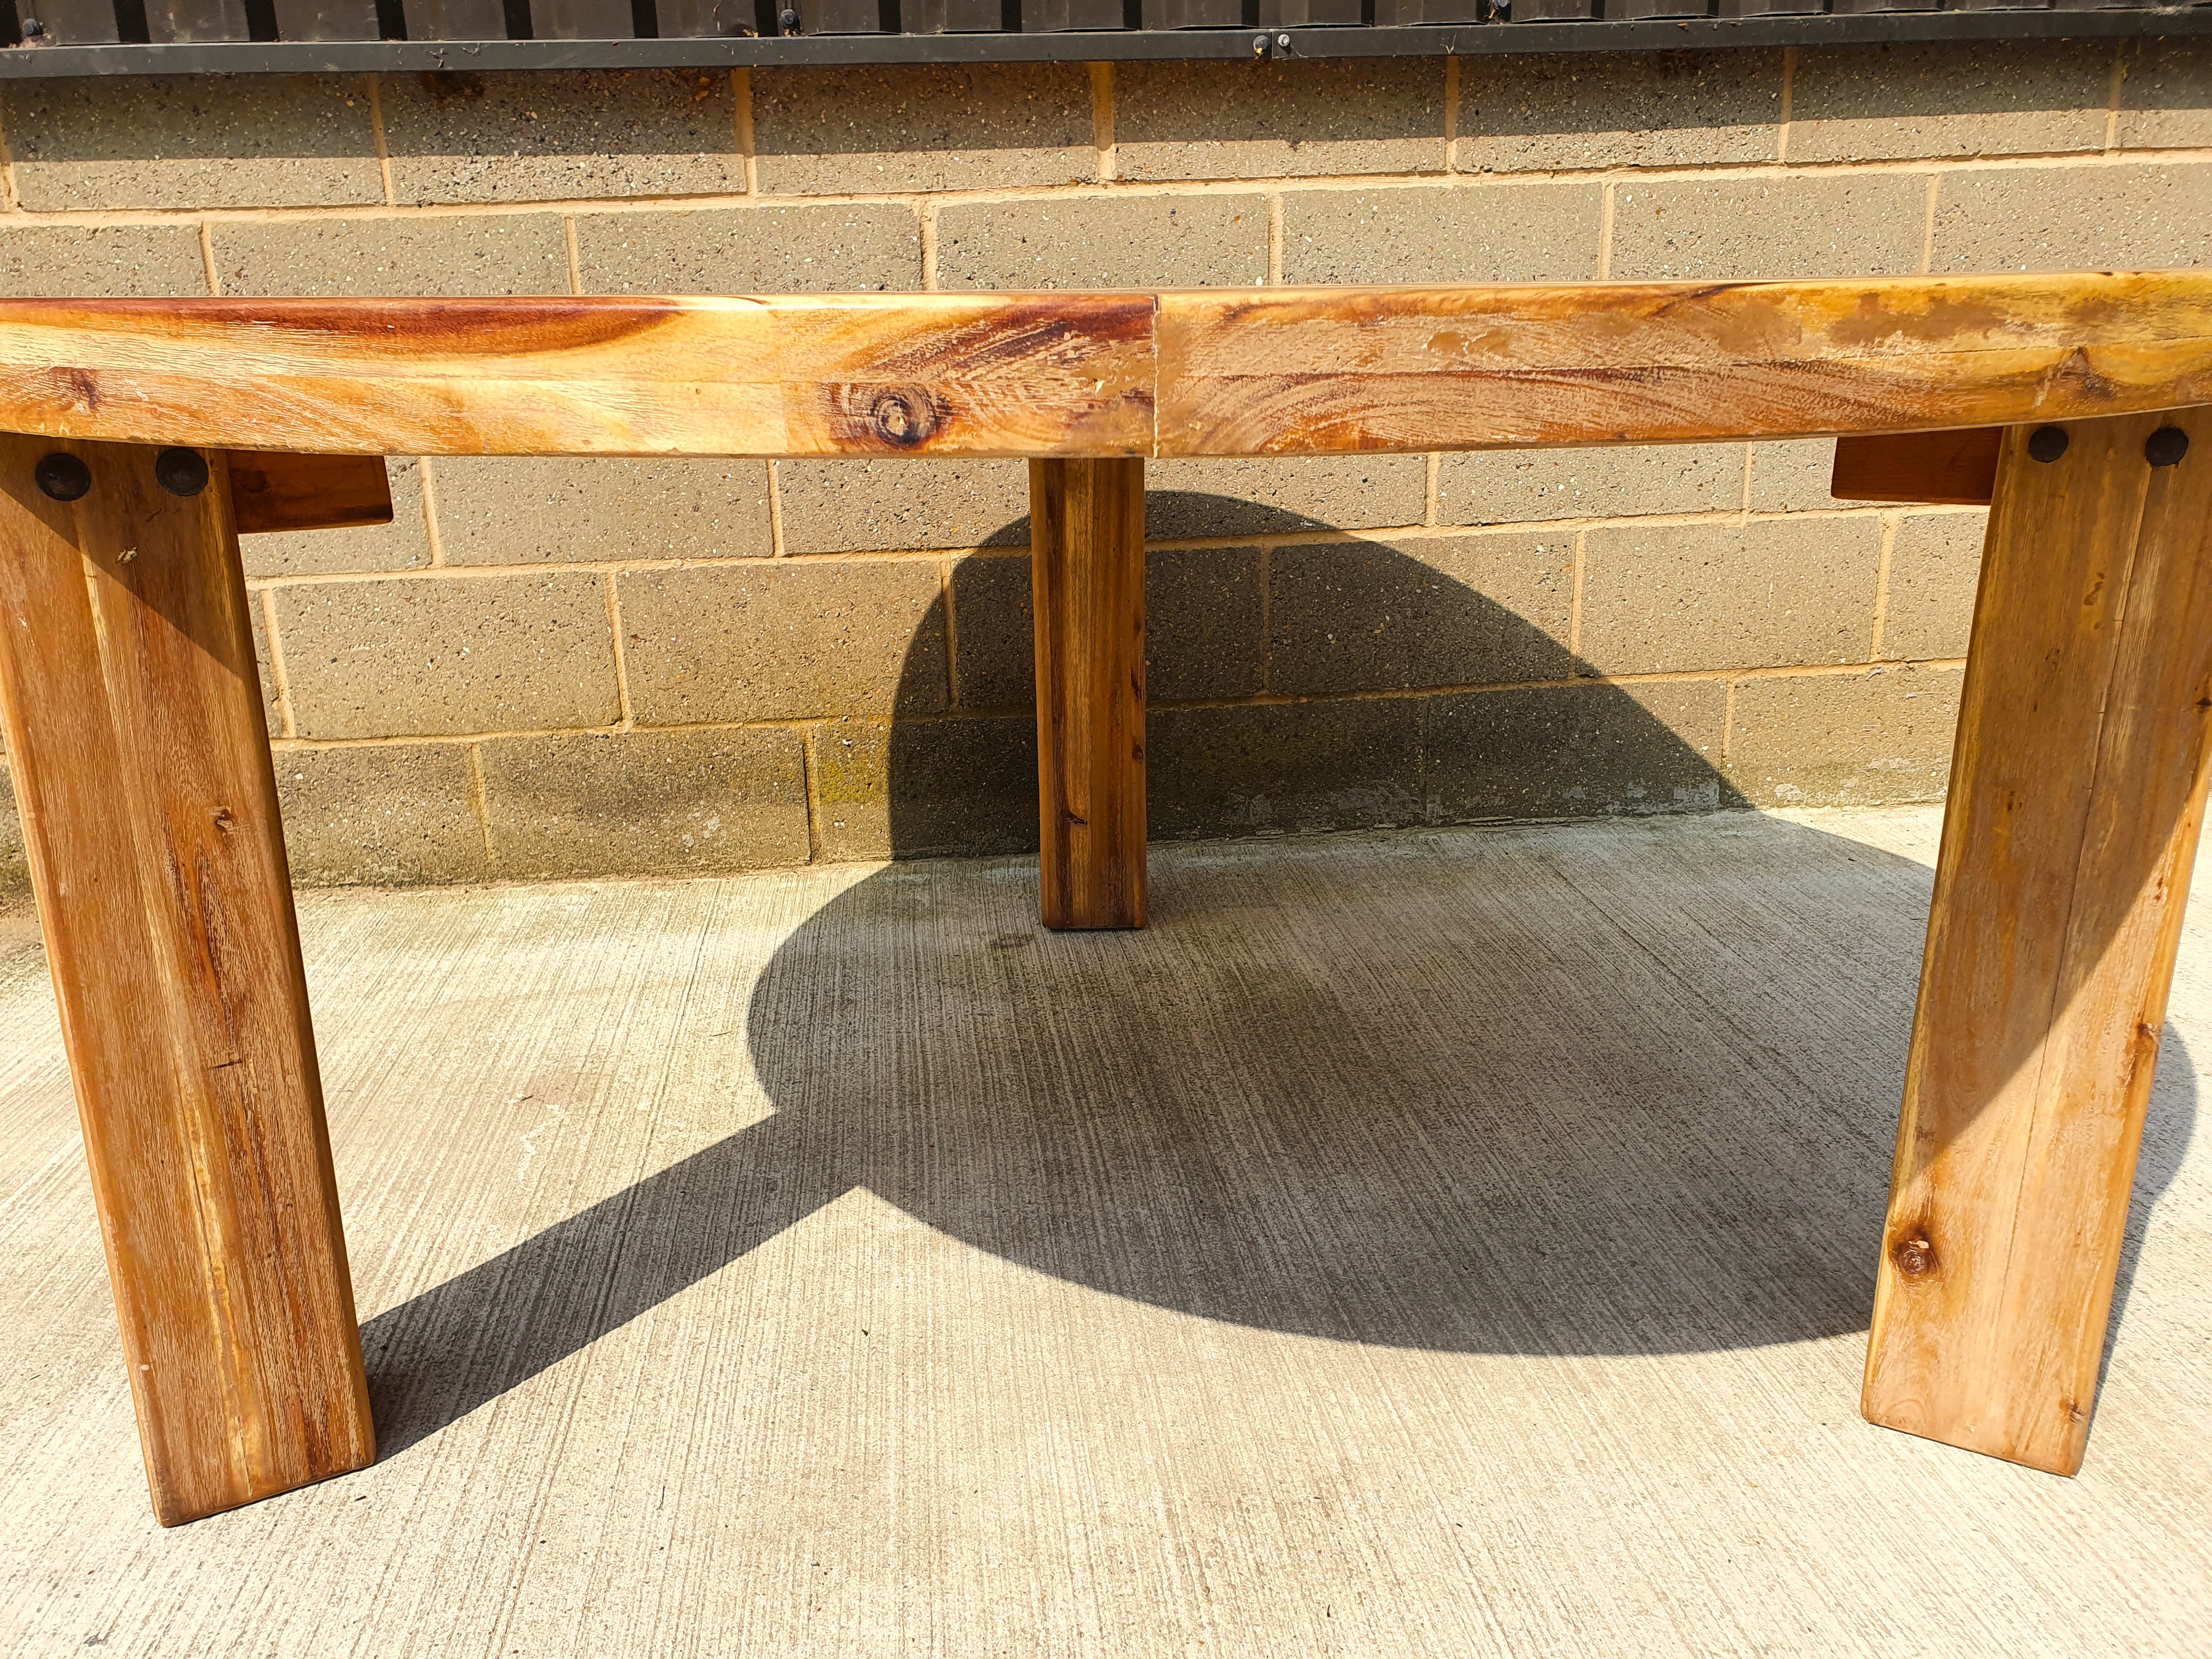 Giant Heavy Weight Solid Wood Garden Dining Table 120cm across x 80cm Tall. Rrp £1299 - Image 3 of 5